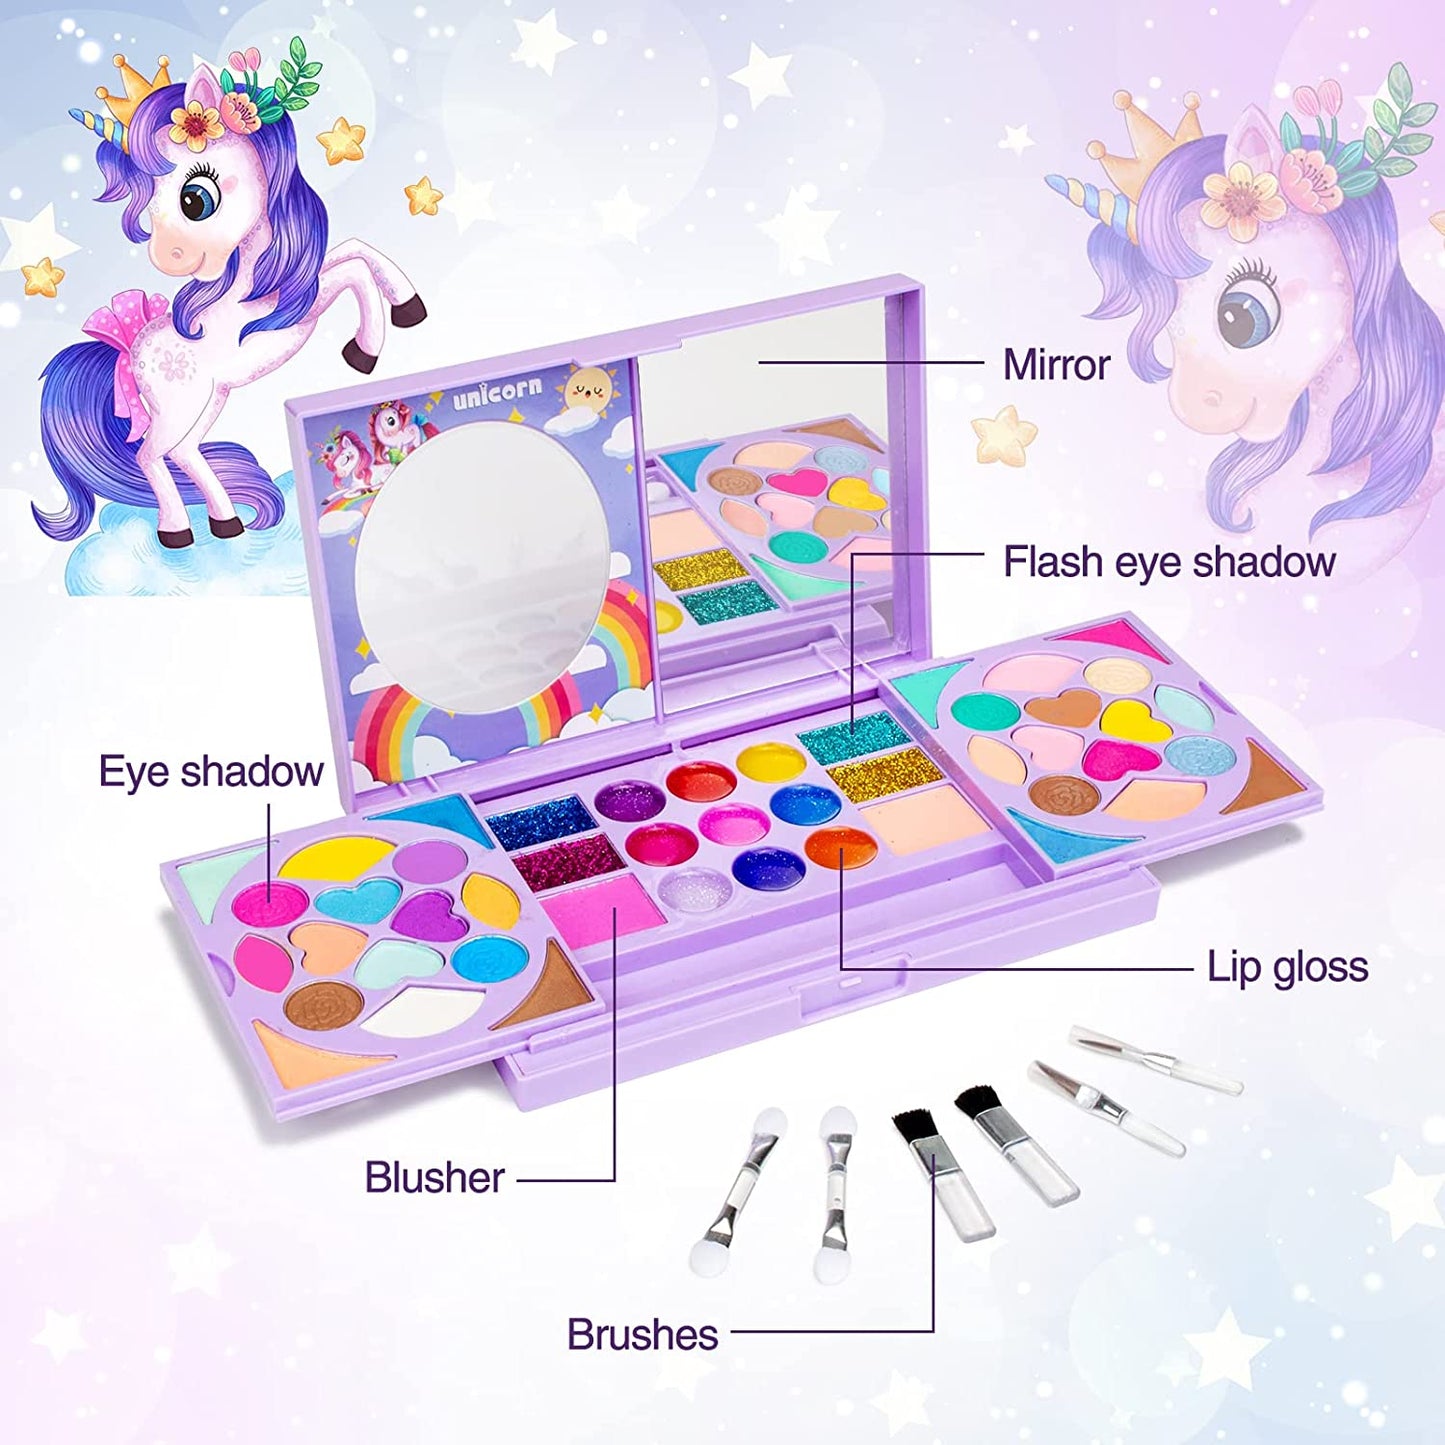 Kids Washable Makeup Kit, Fold Out Makeup Palette with Mirror, Make Up Toy Gifts for Girls - Safety Tested- Non Toxic